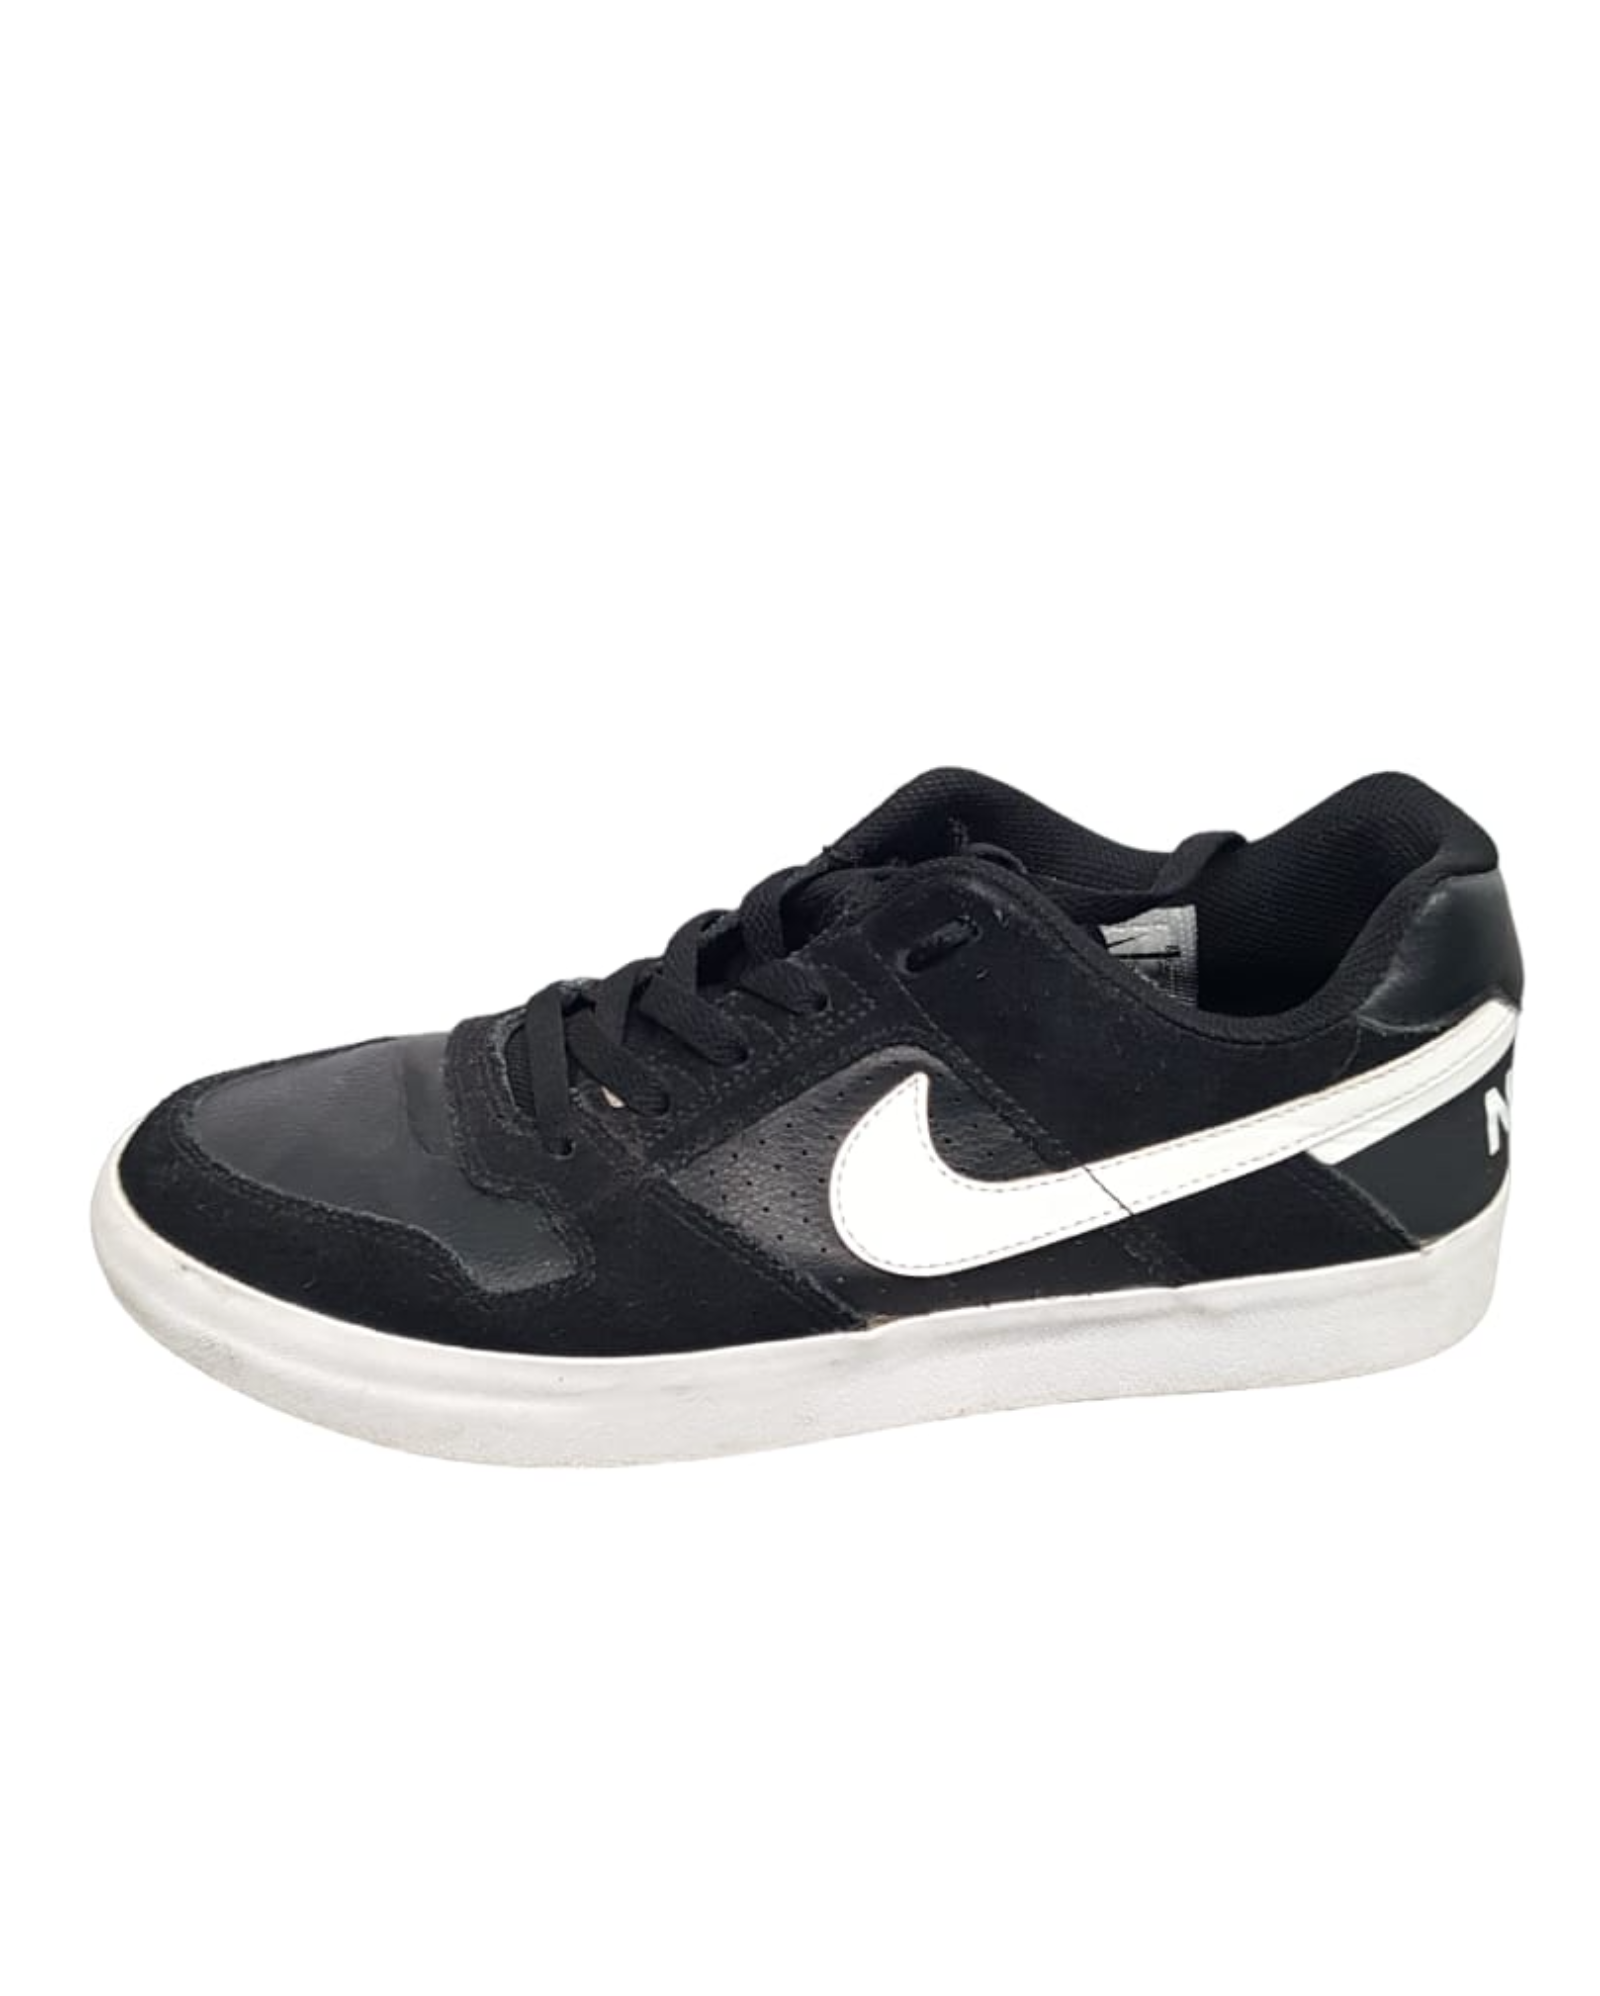 Zapatos Casuales Nike